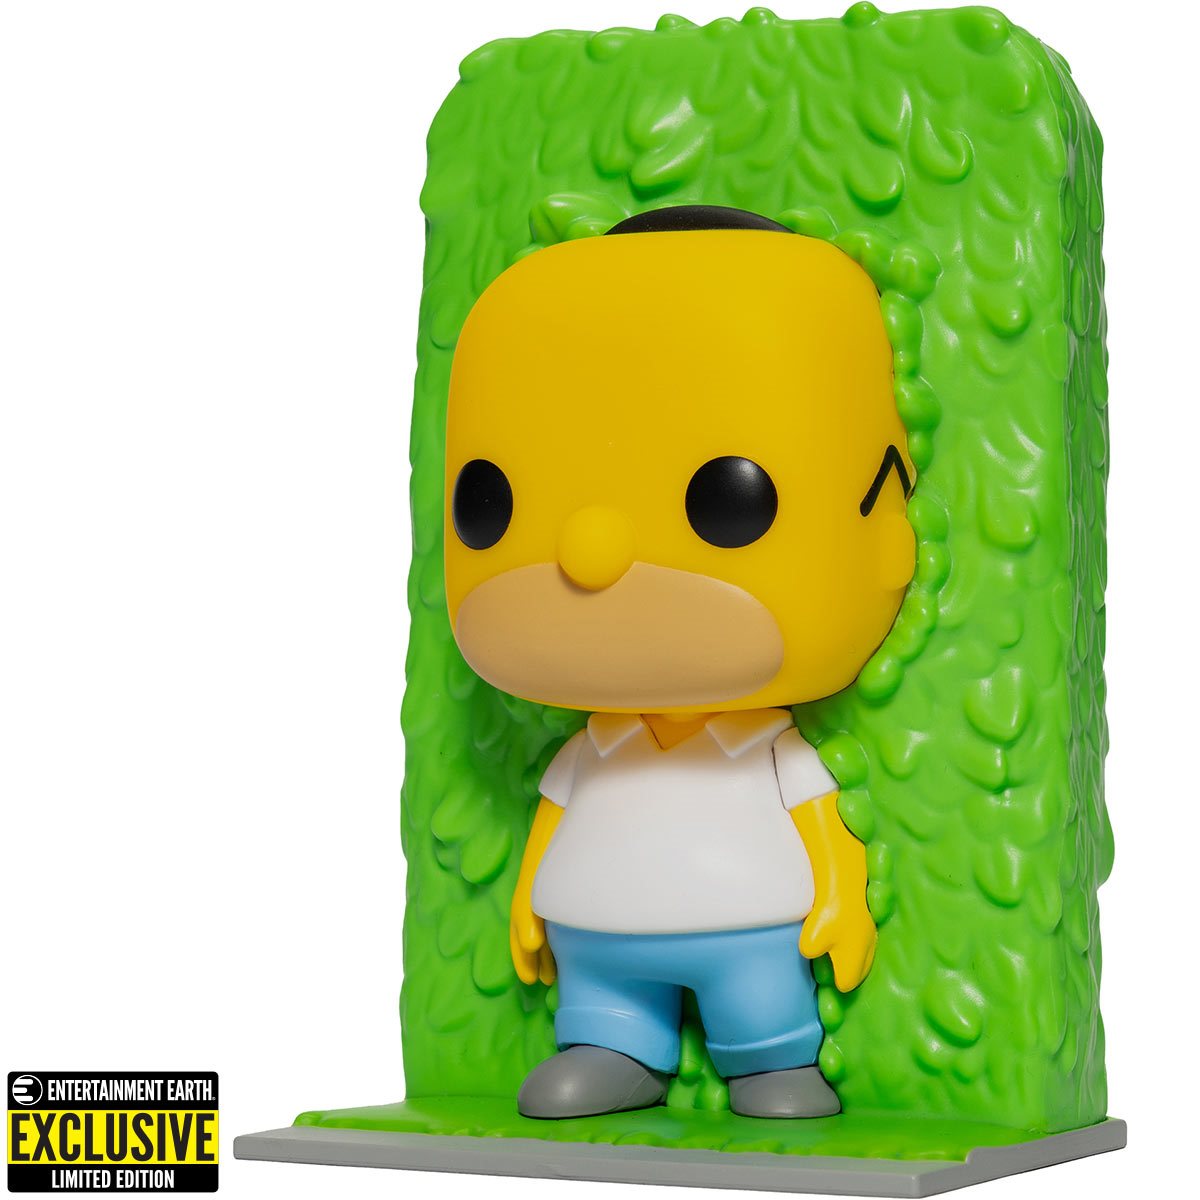 gentage Ved navn Næb The Simpsons Homer in Hedges Funko Pop! Vinyl Figure - Entertainment Earth  Exclusive